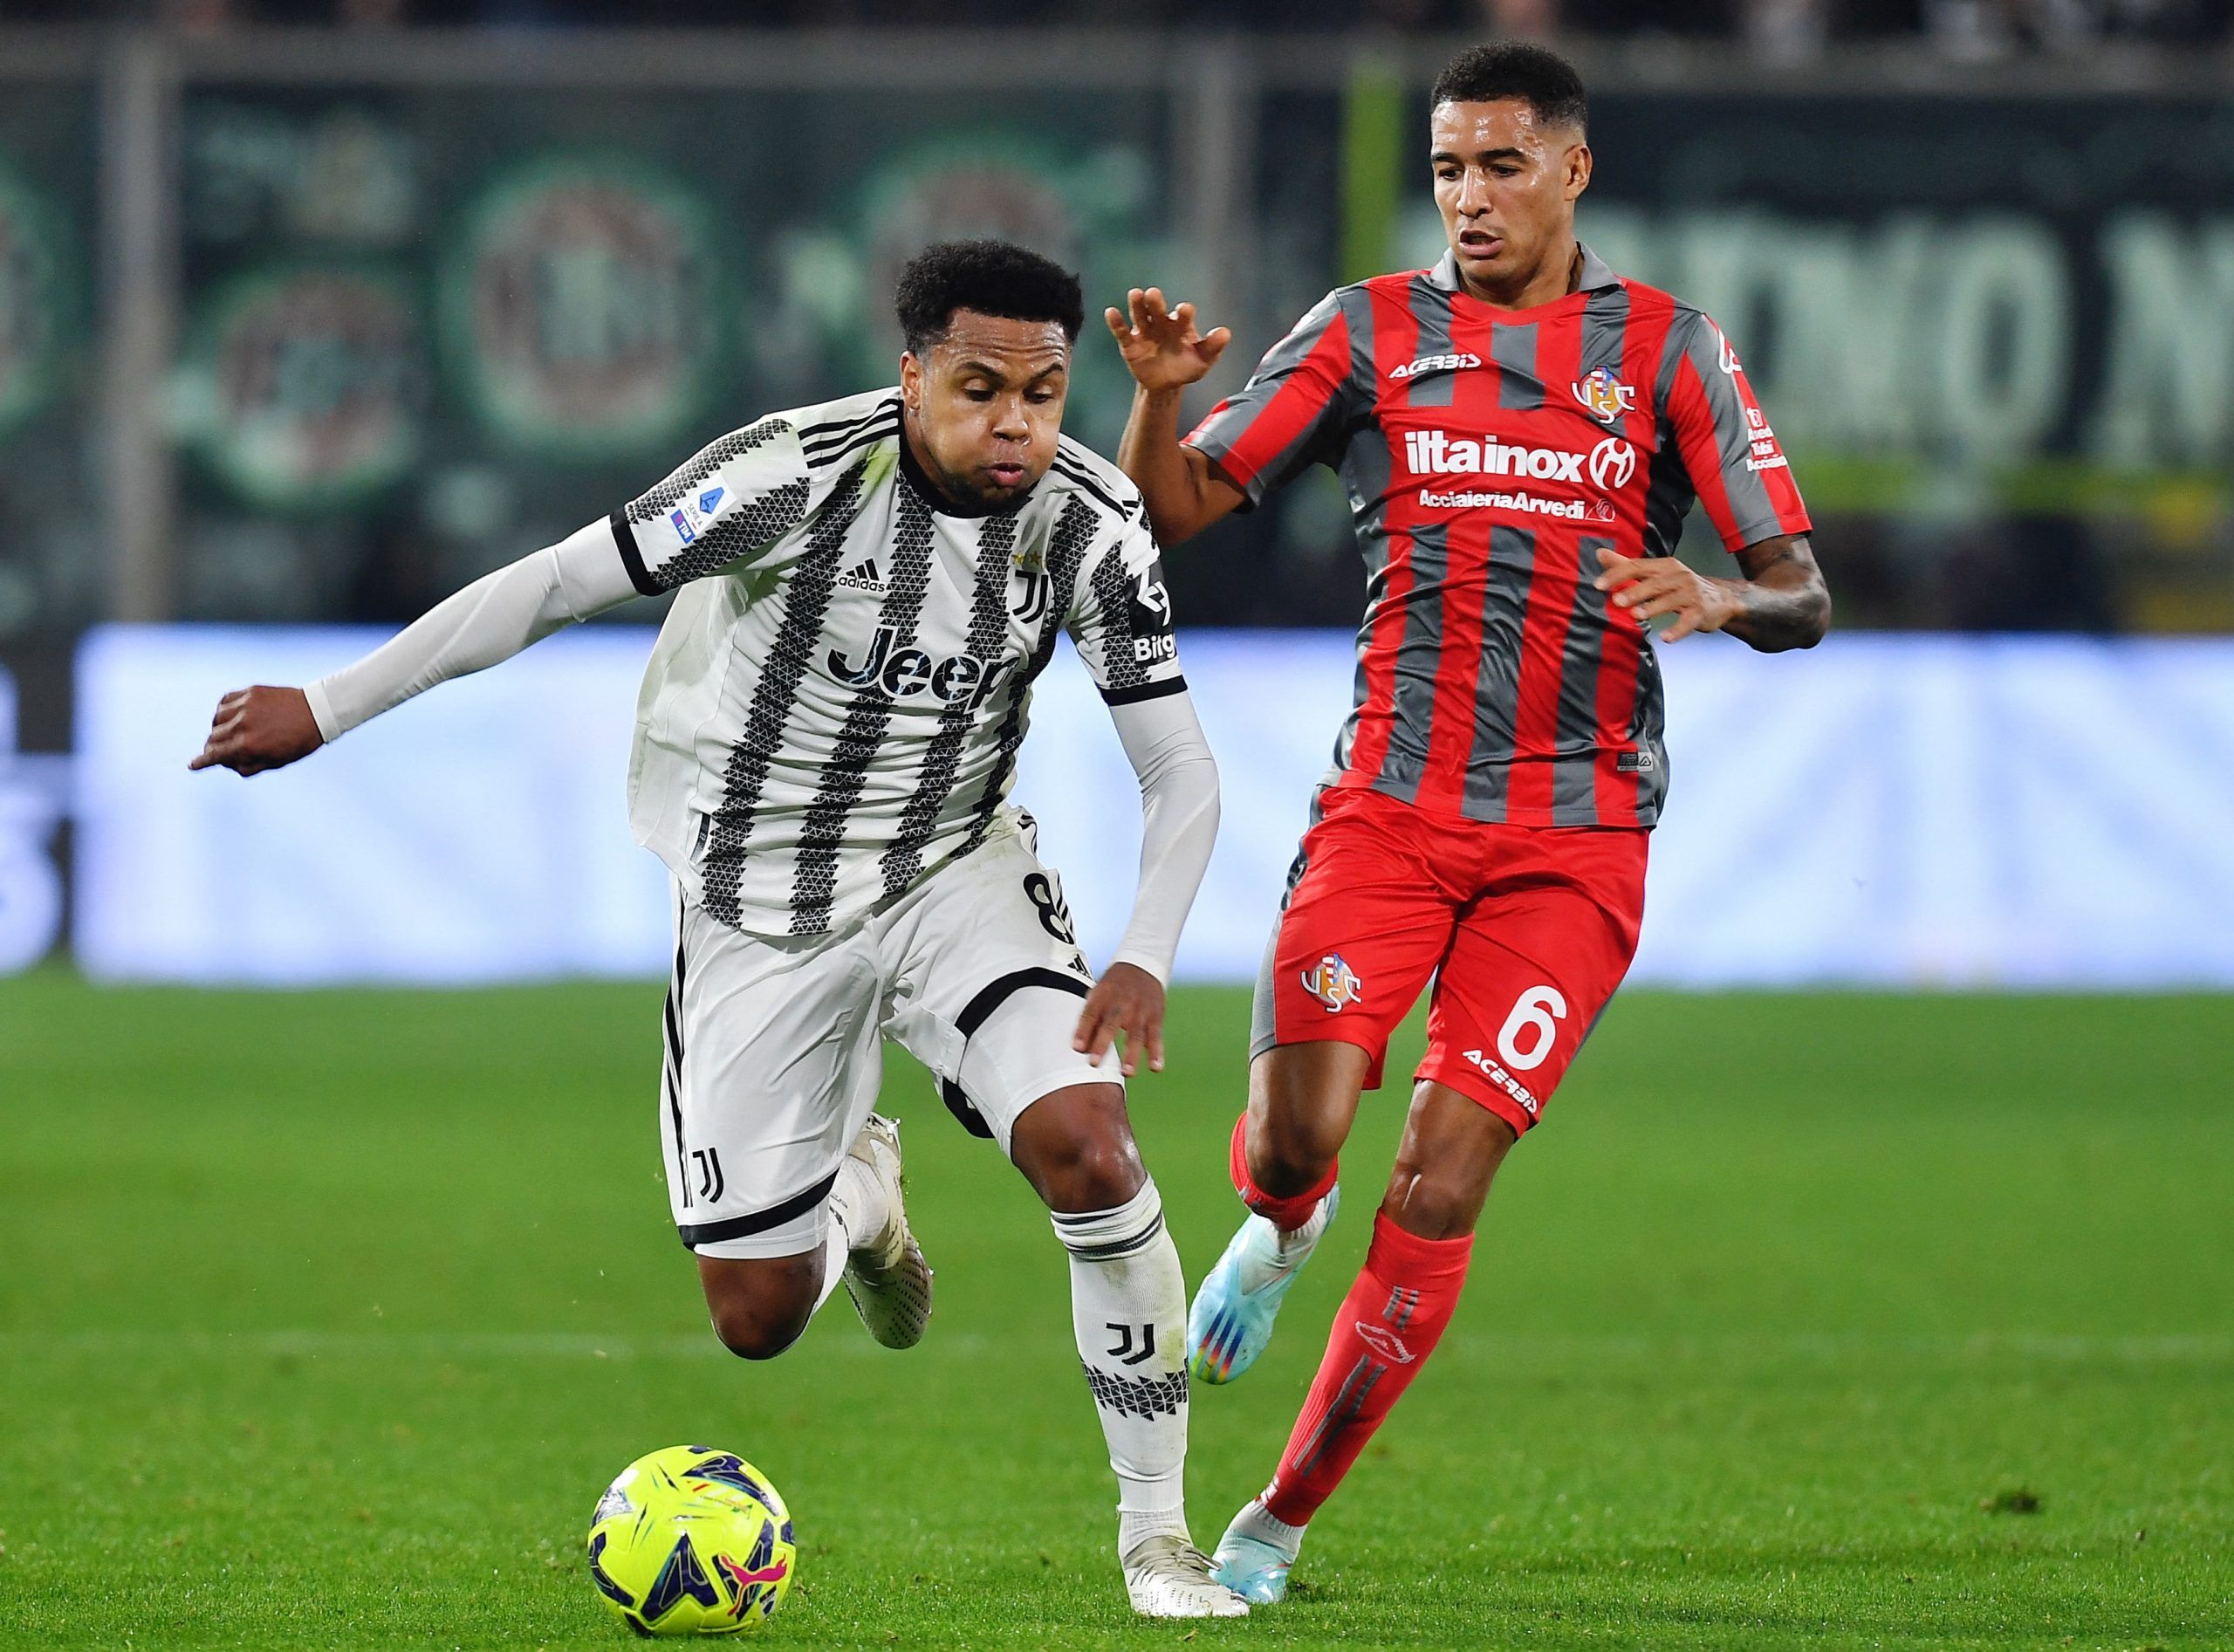 Soccer Football - Serie A - Cremonese v Juventus - Stadio Giovanni Zini, Cremona, Italy - January 4, 2023 Juventus' Weston McKennie in action with Cremonese's Charles Pickel REUTERS/Jennifer Lorenzini